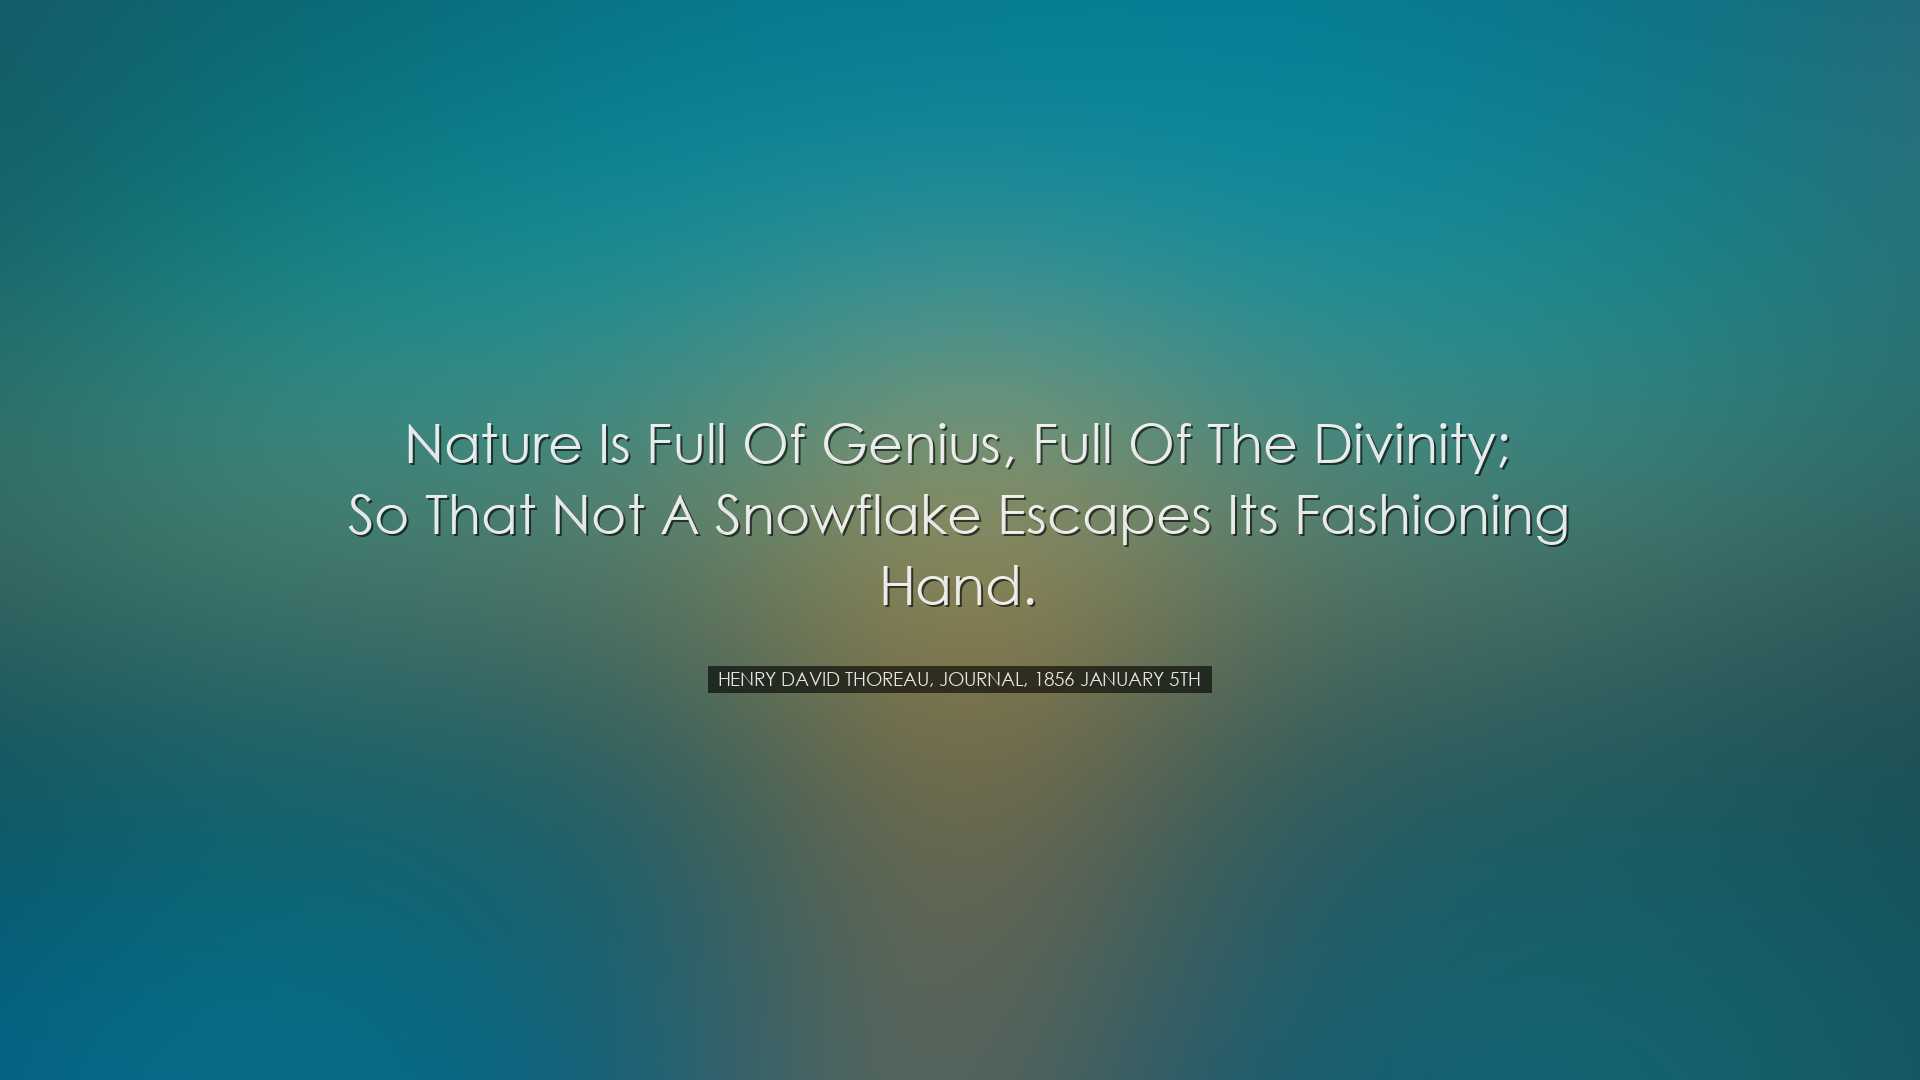 Nature is full of genius, full of the divinity; so that not a snow